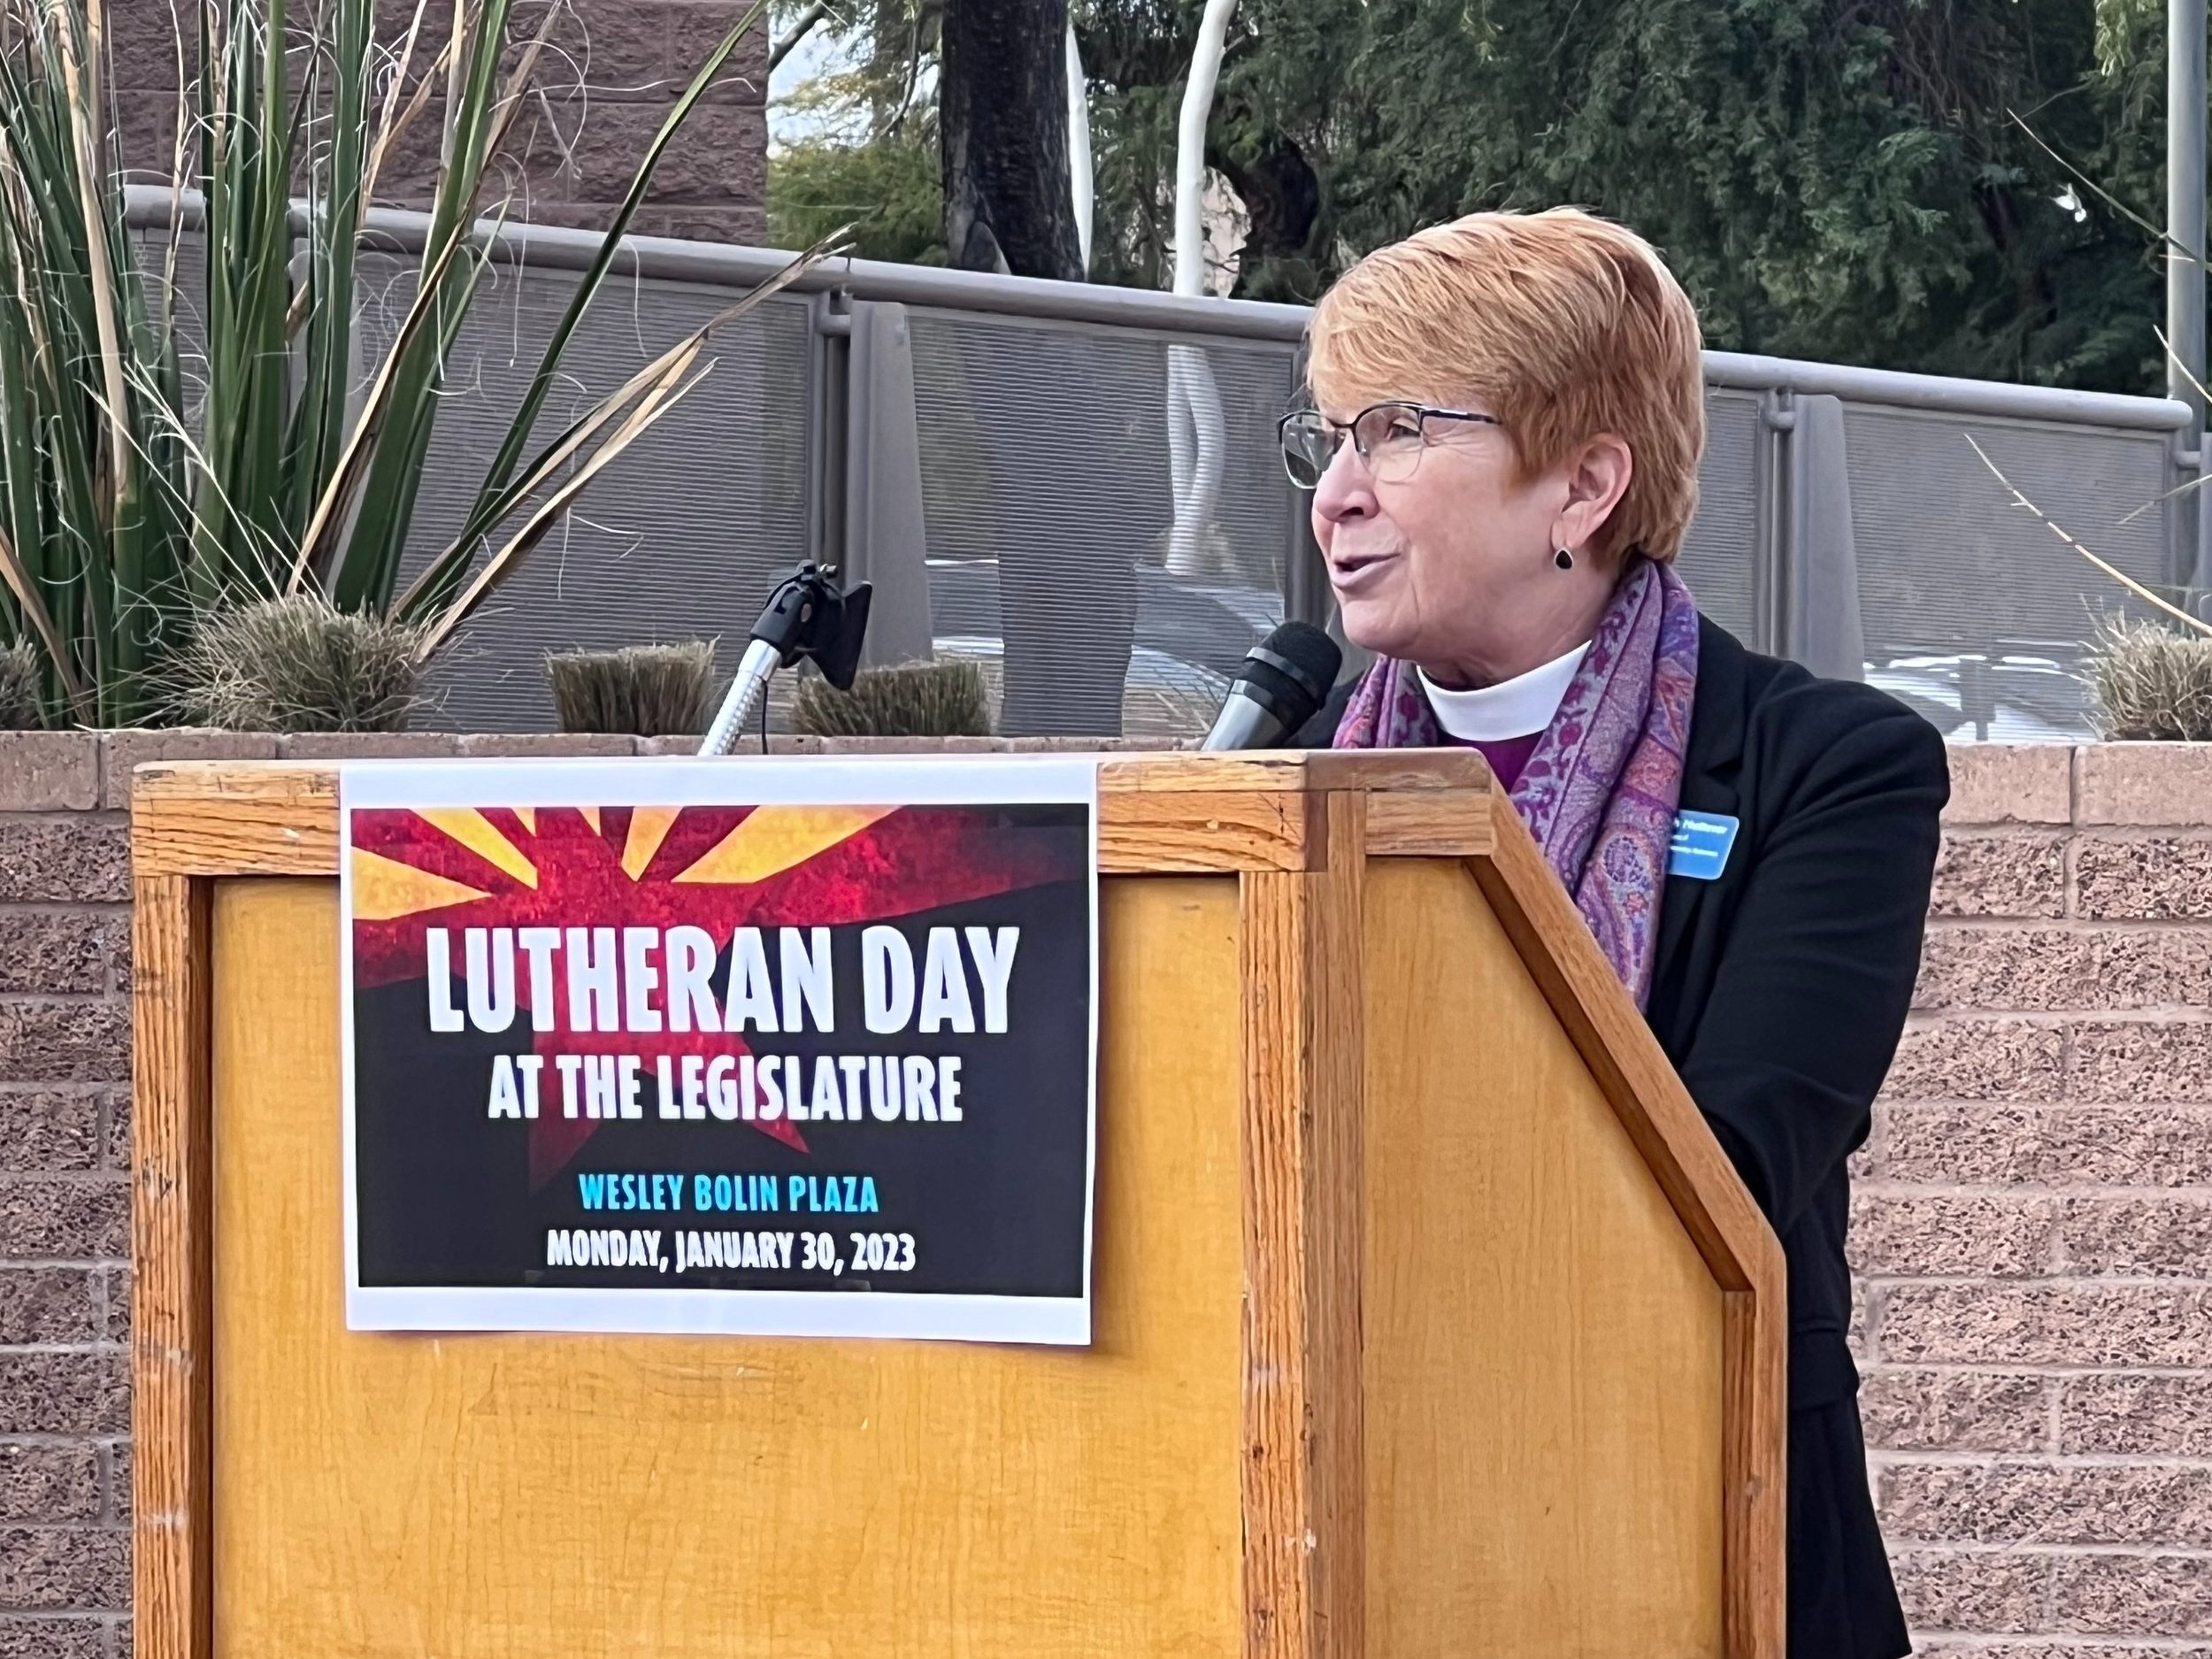  Bishop Deborah Hutterer leads the opening devotion. “We are gathered and united today at Wesley Bolin Plaza, and maybe we are surprised by our unity in this place at a time of deep polarization in our culture. But dear friends, the reality is this: 